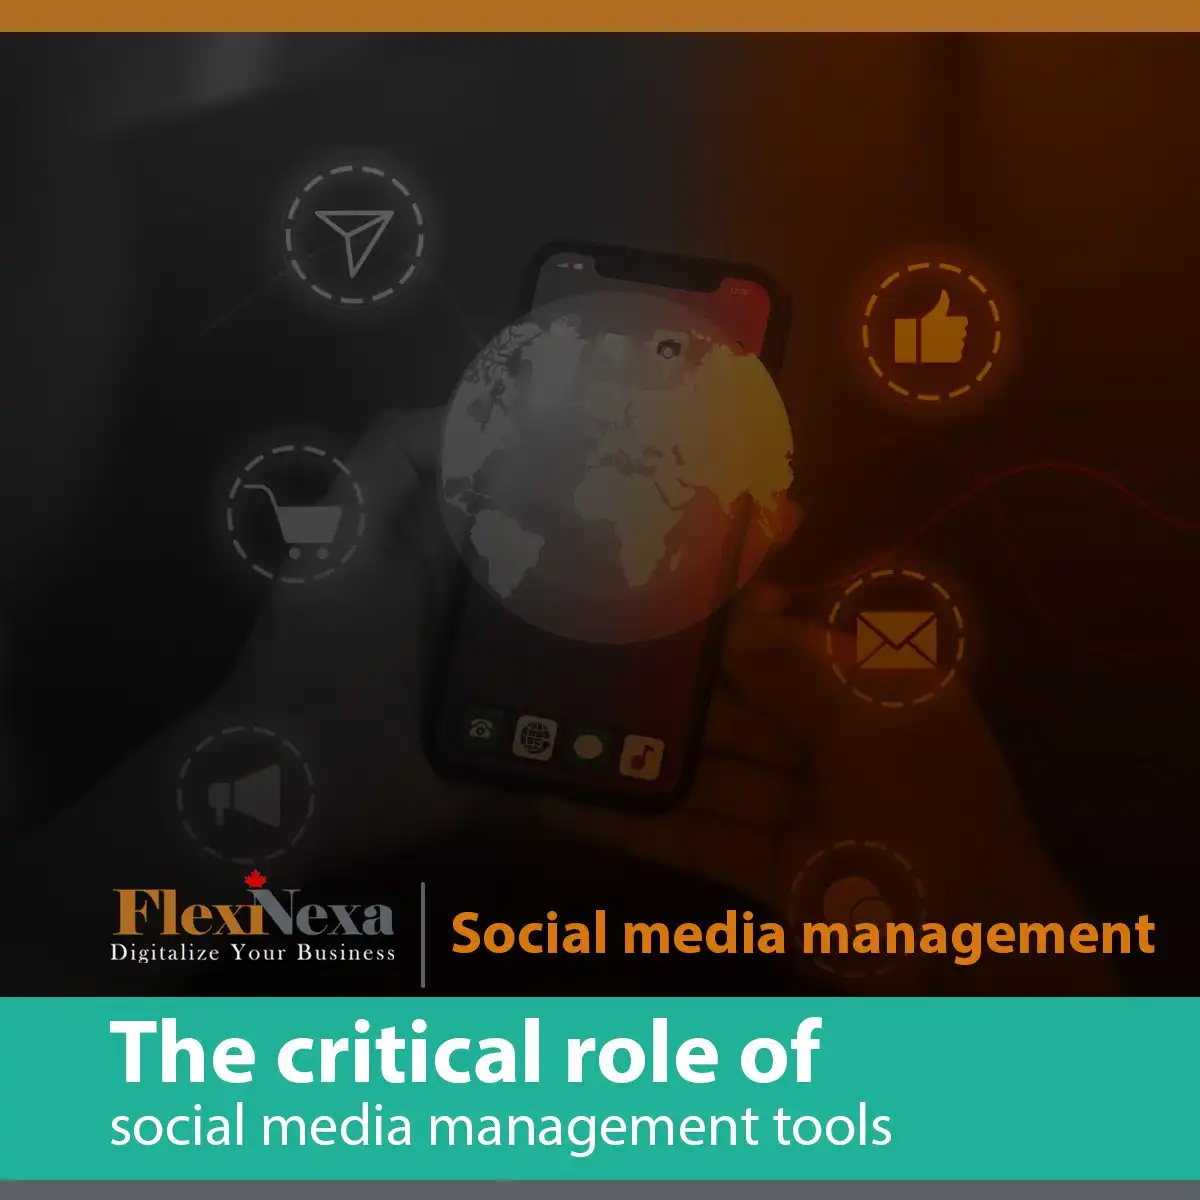 The critical role of social media management tools